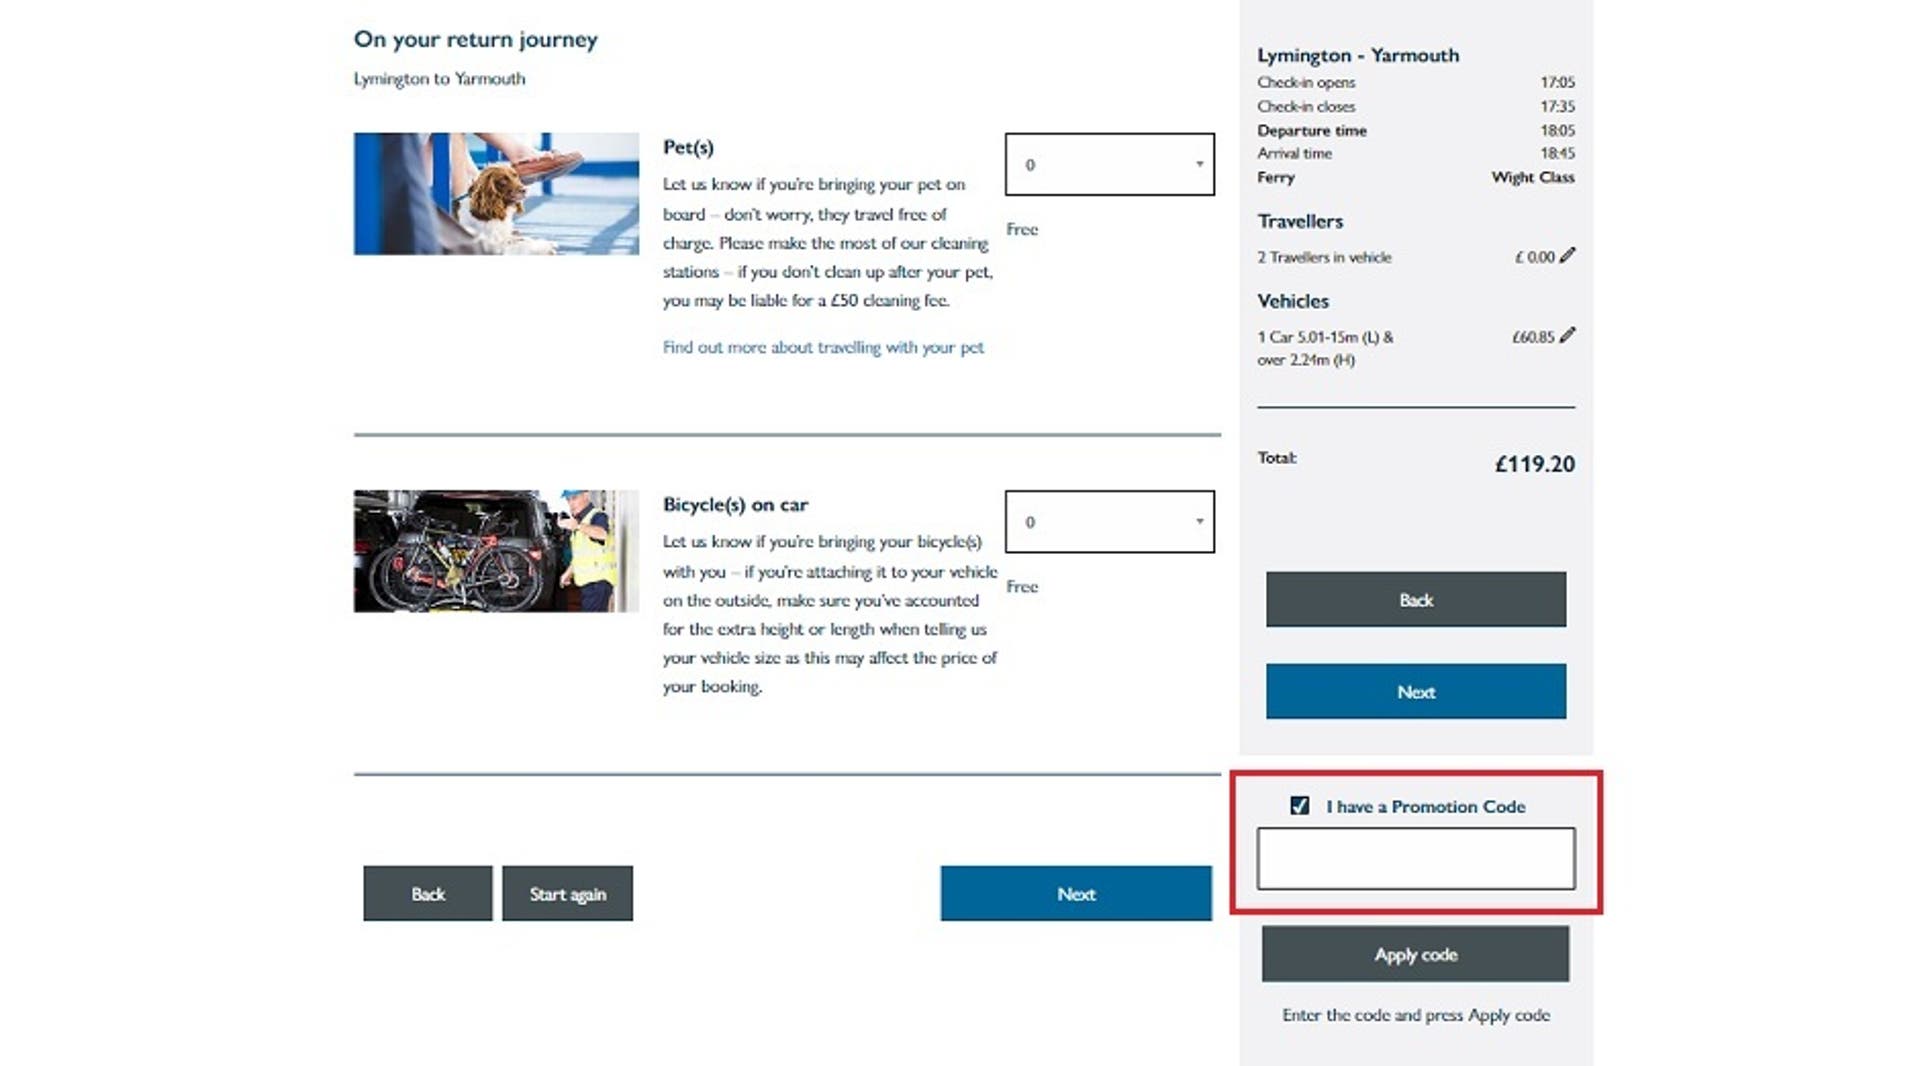  A screenshot of the Wightlink website showing users how to user their discount code with the 'I have a Promotion Code' box highlighted. 